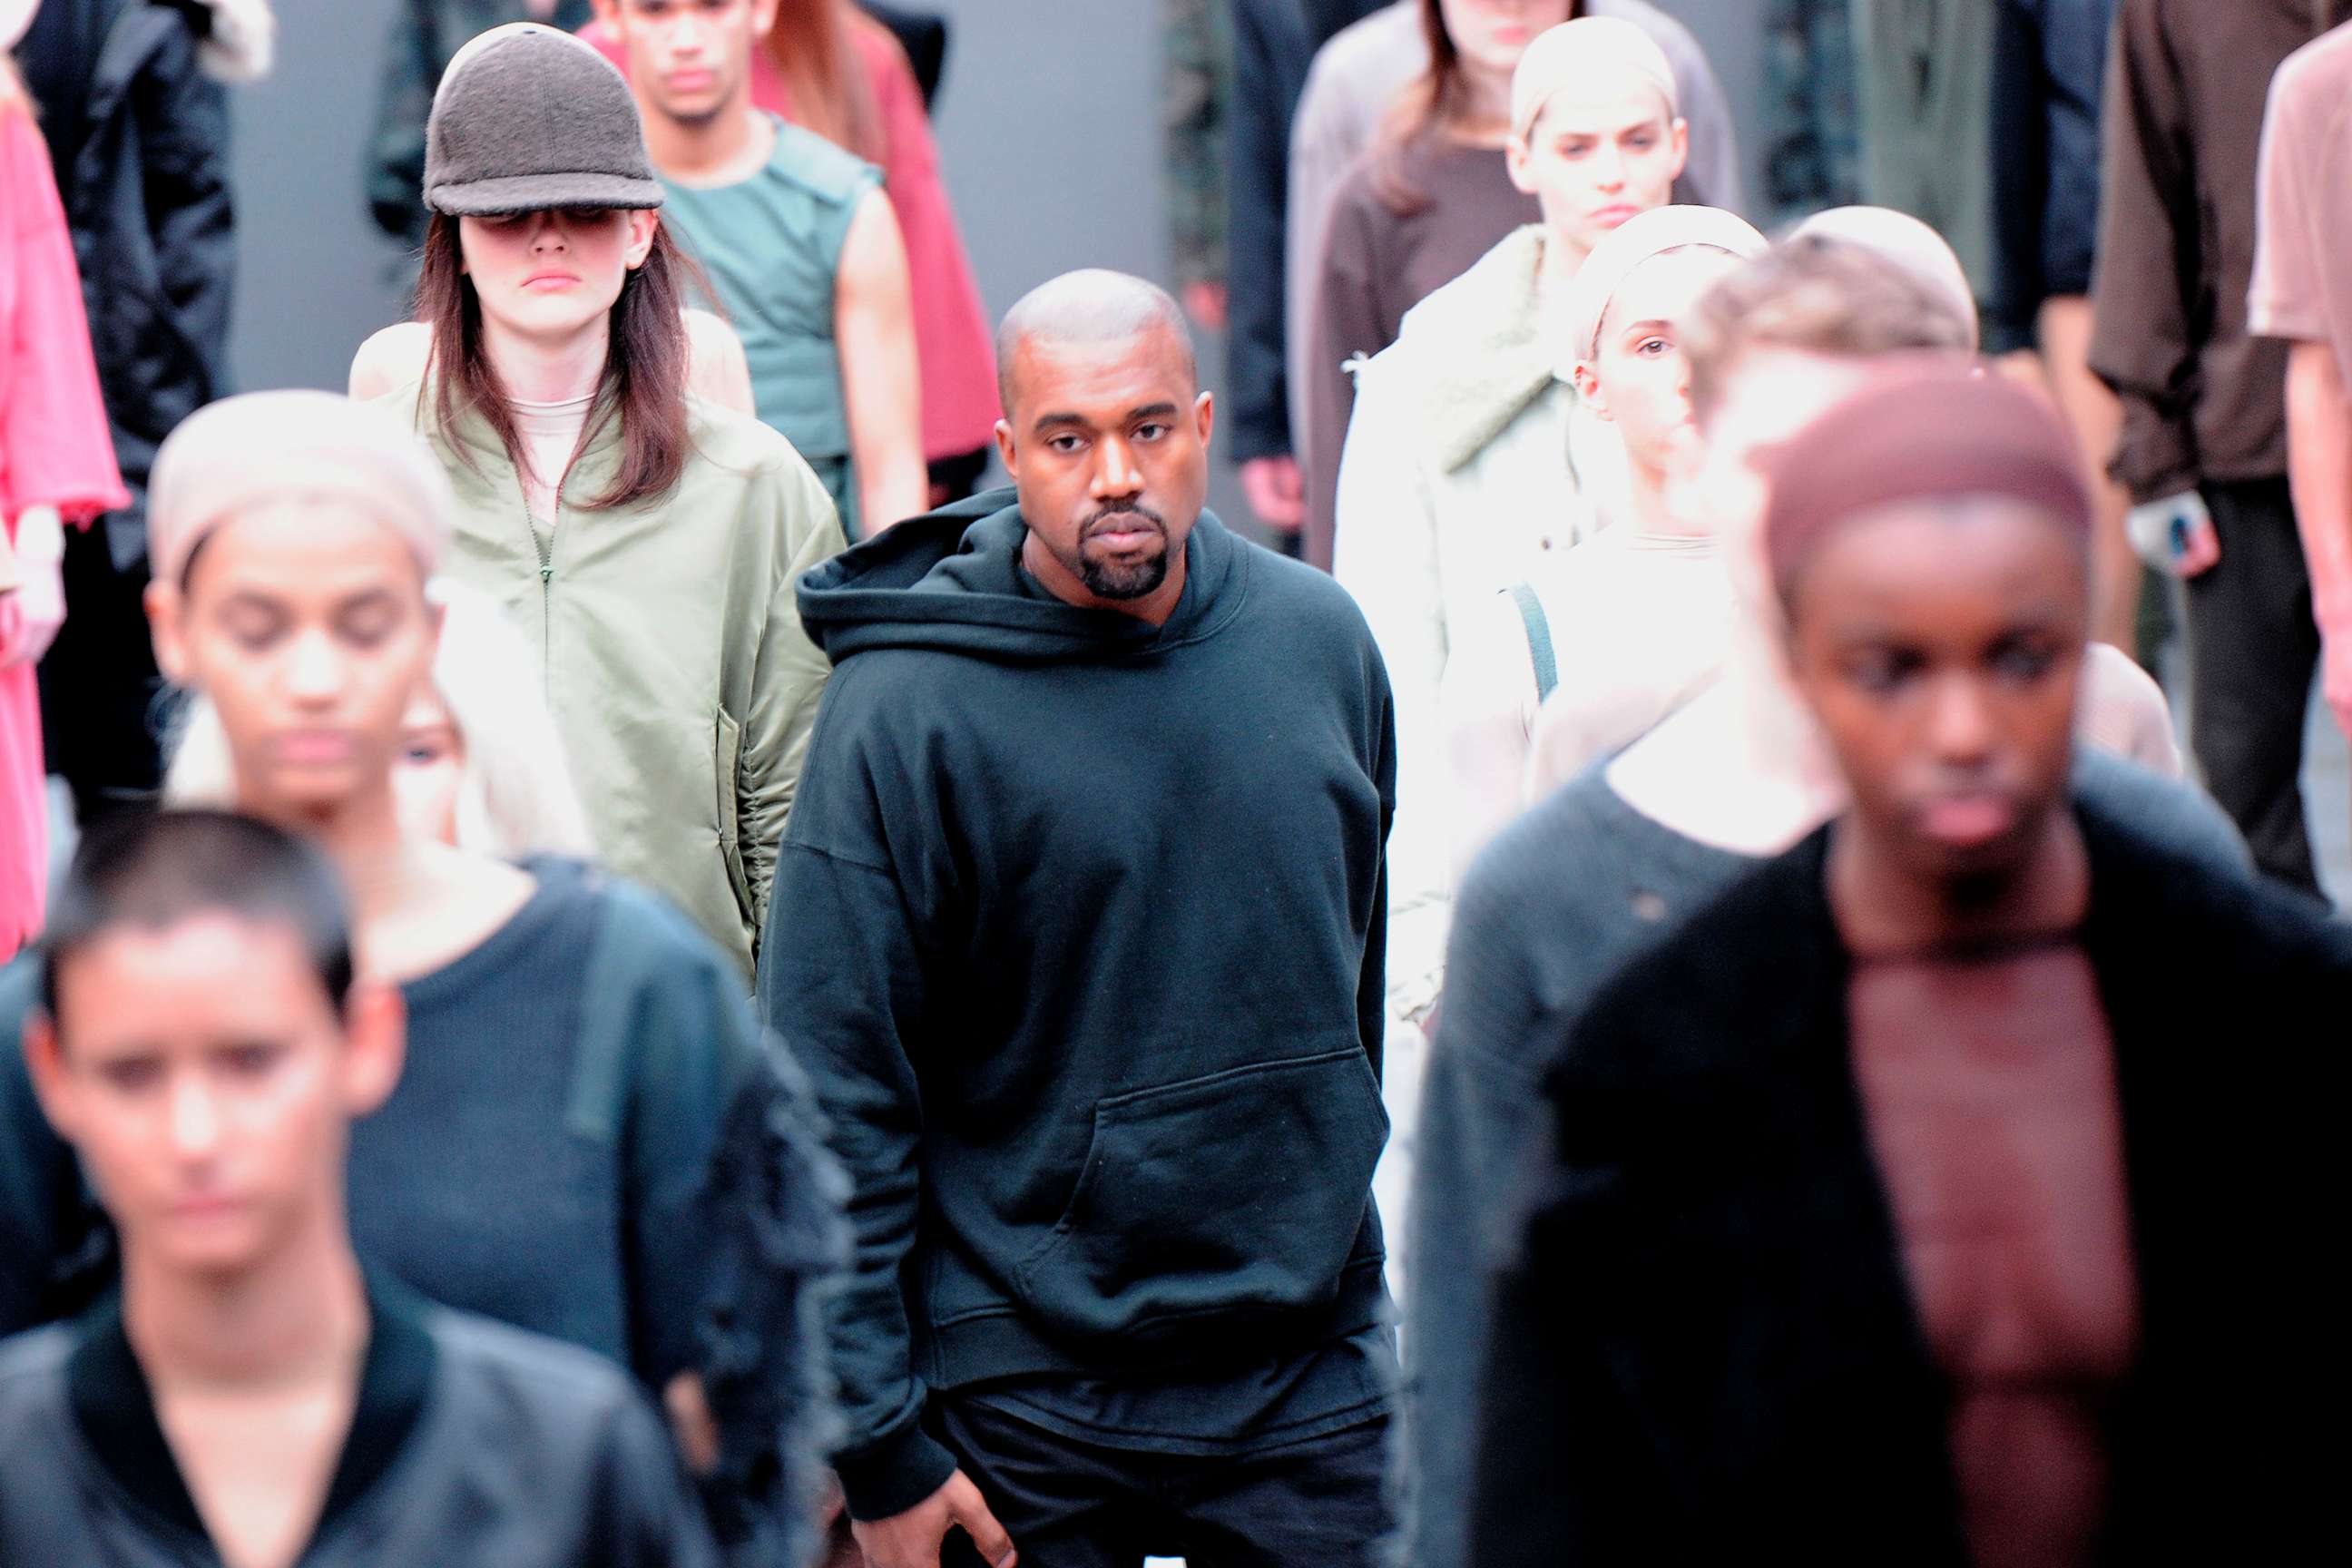 PHOTO: In this Feb. 12, 2015, file photo, Kanye West appears at a ADIDAS x Kanye West Fall 2015 Presentation at Skylight Clarkson Square in New York.